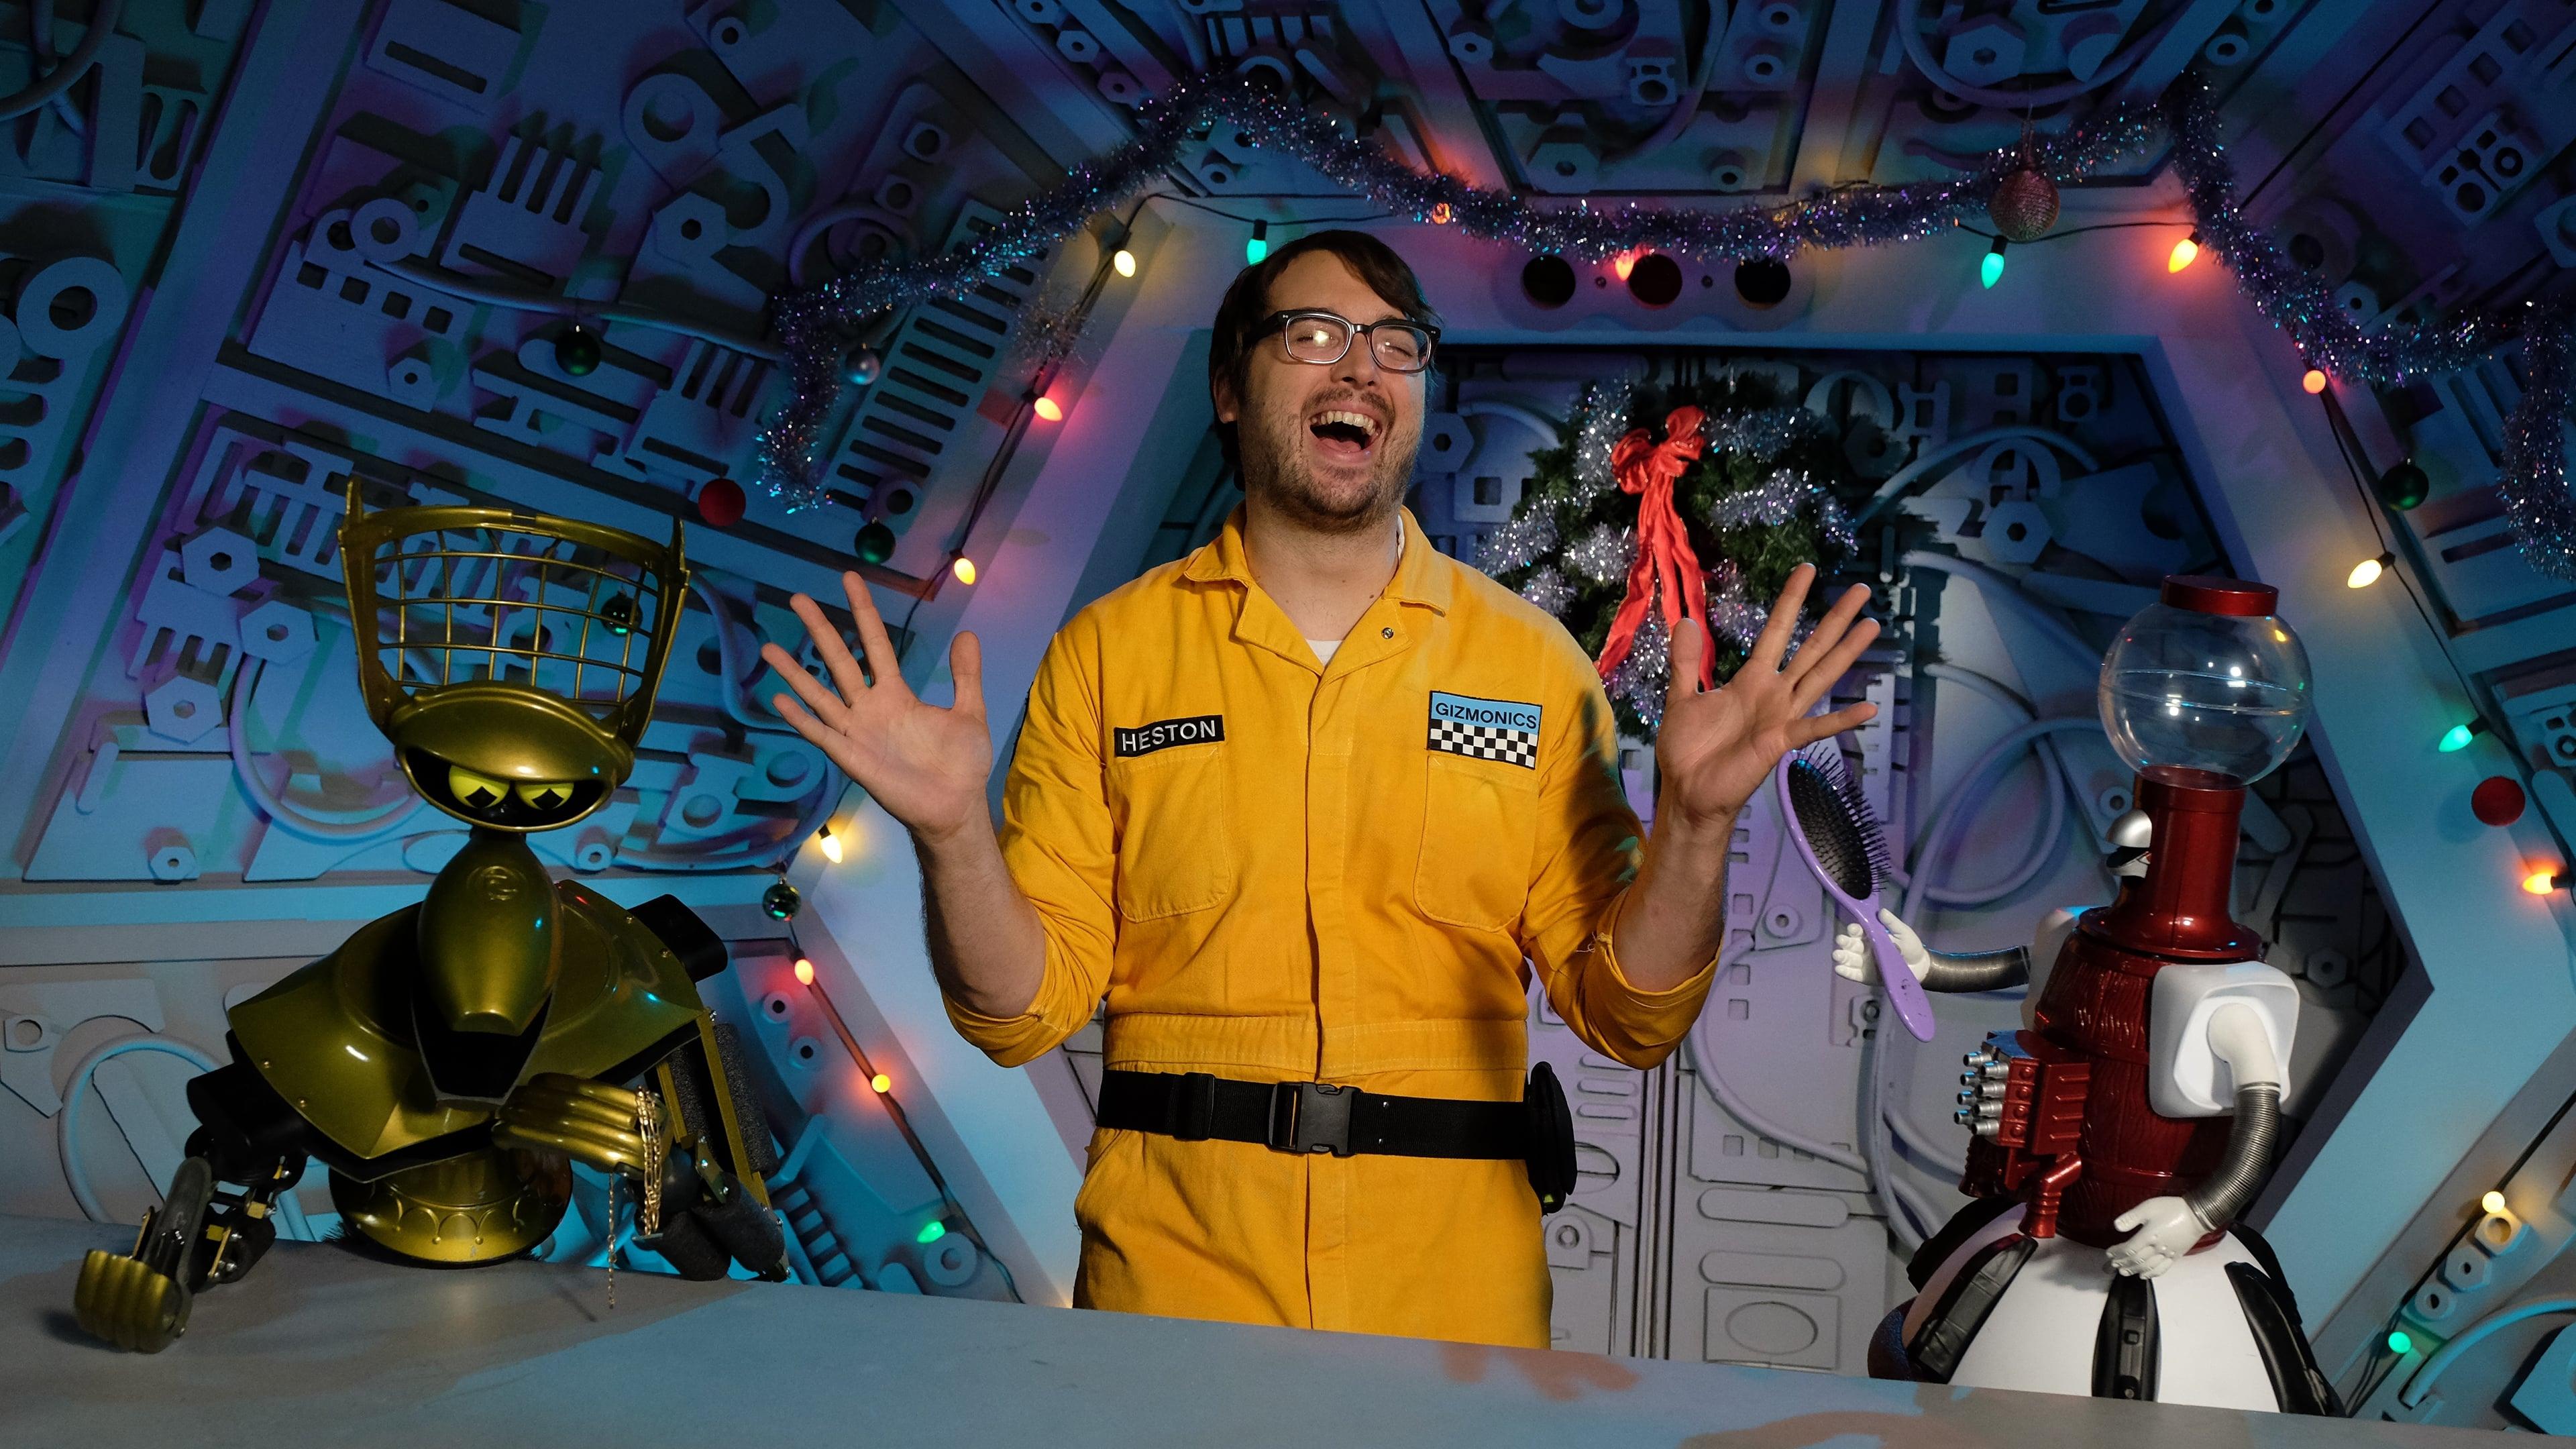 Mystery Science Theater 3000 backdrop